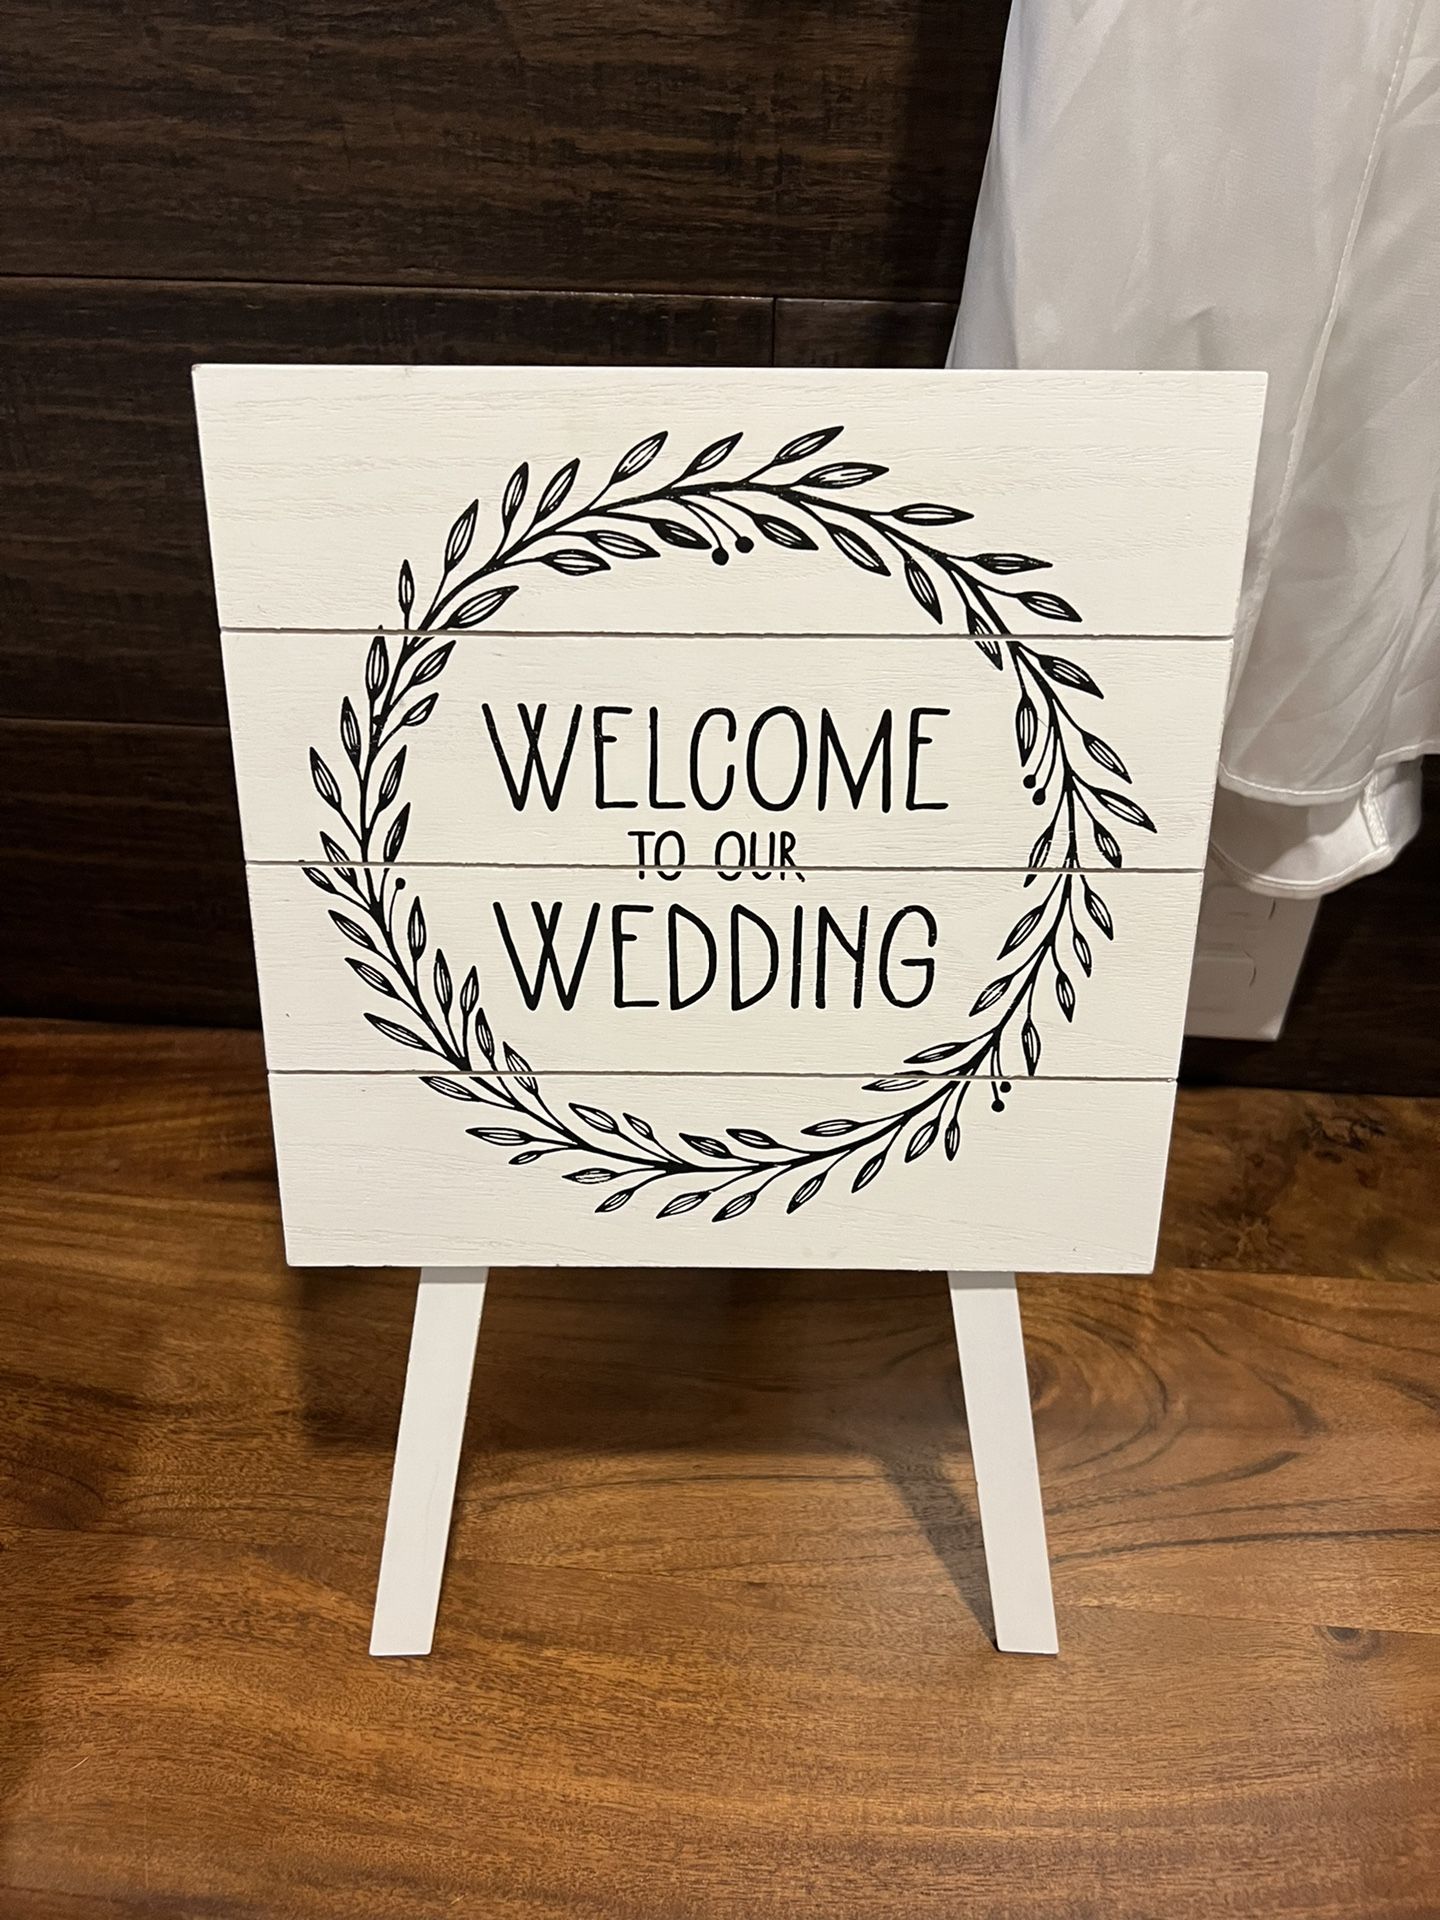 Welcome to our wedding table sign